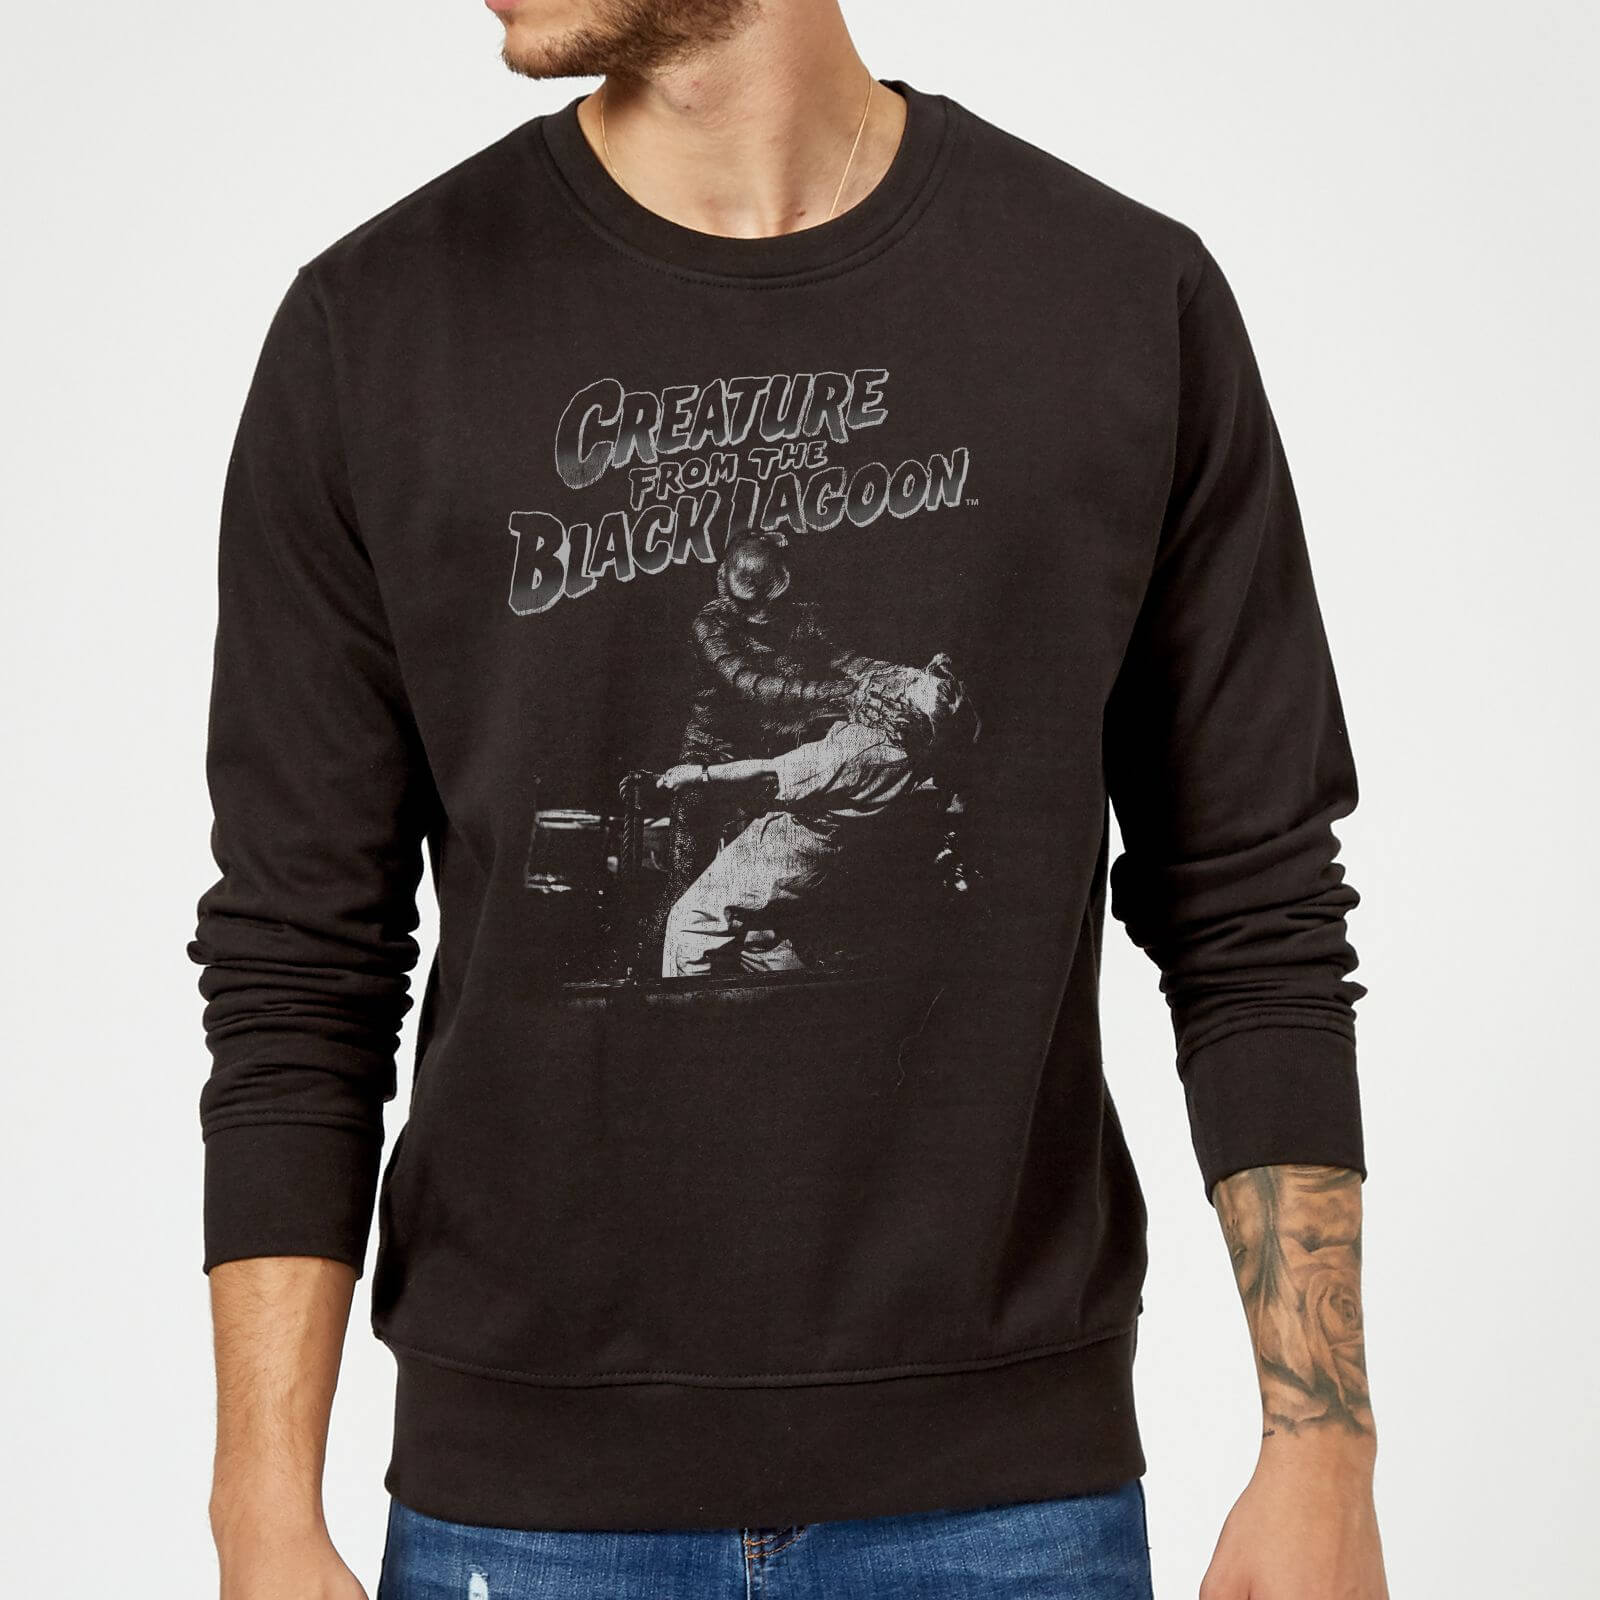 Universal Monsters Creature From The Black Lagoon Black and White Sweatshirt - Black - XL